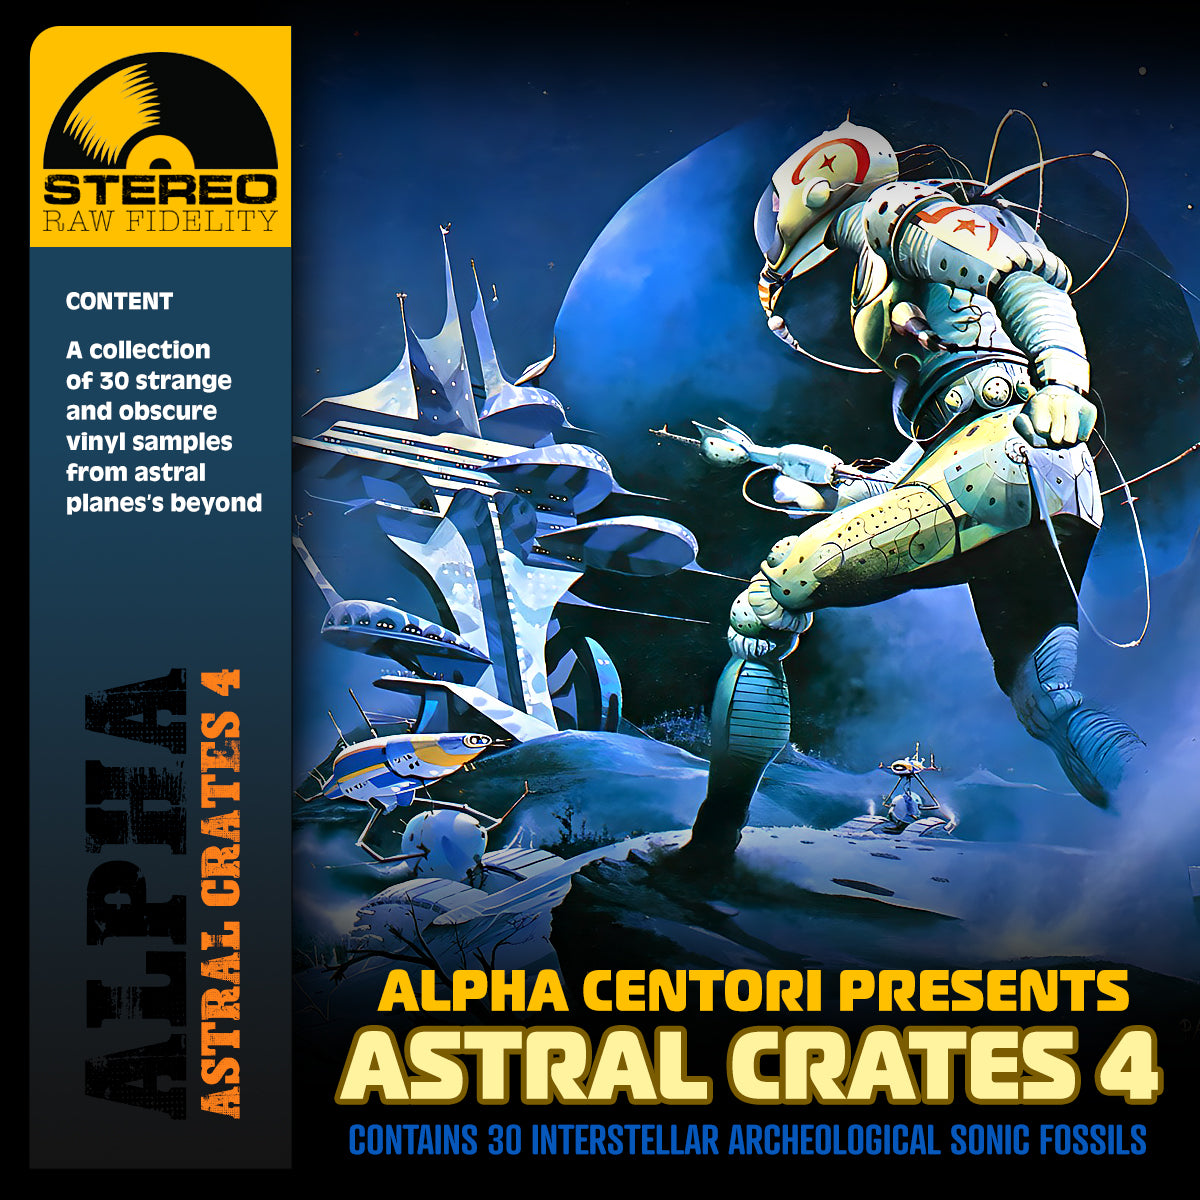 Astral Crates 4